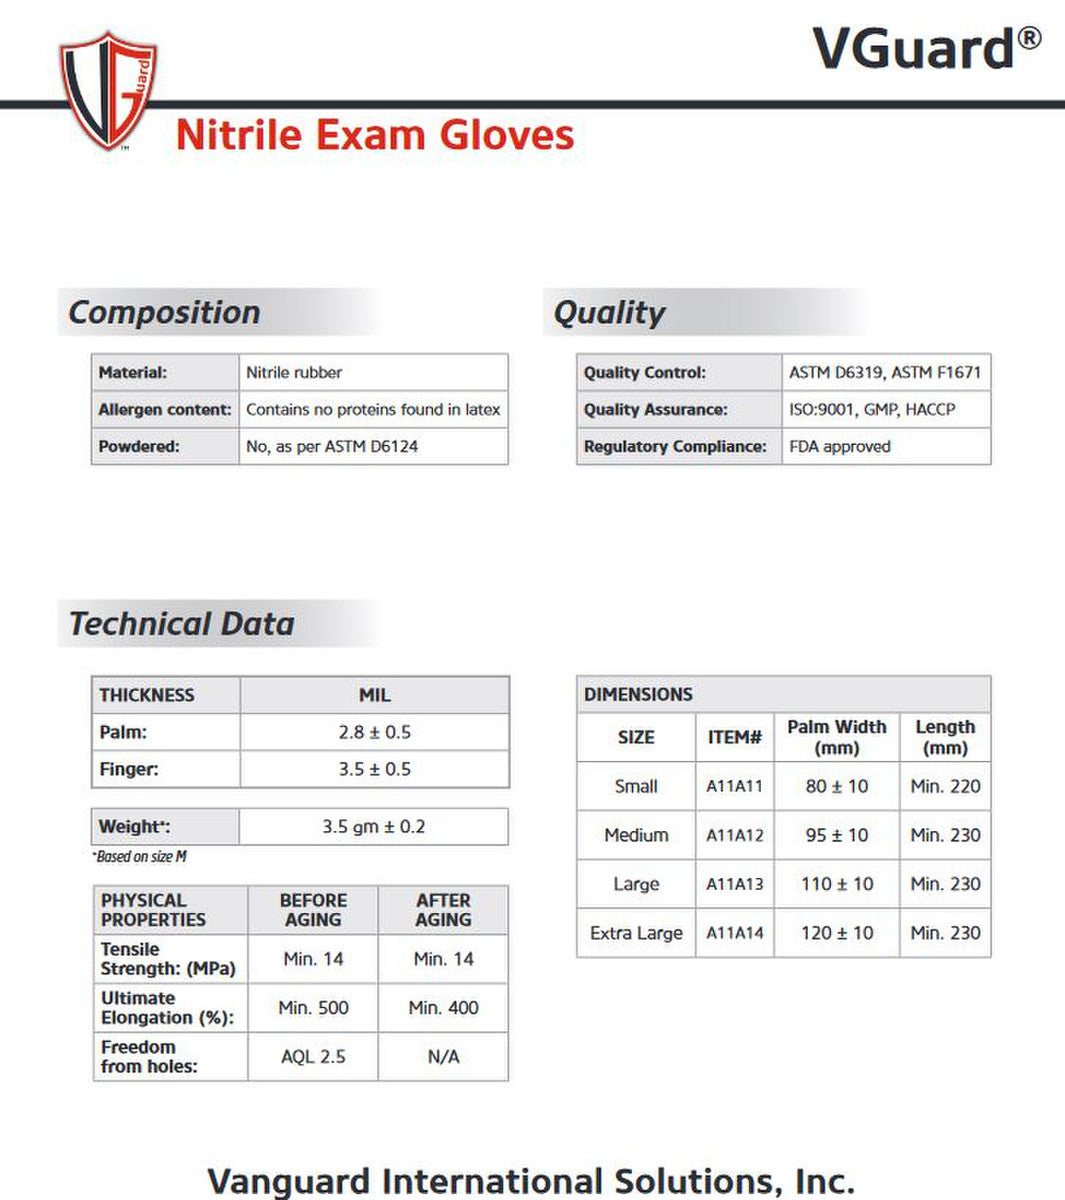 Nitrile Gloves, 3.5 Mil, Blue, Powder-Free, {Exam Approved} 100 / box, 10 boxes /case